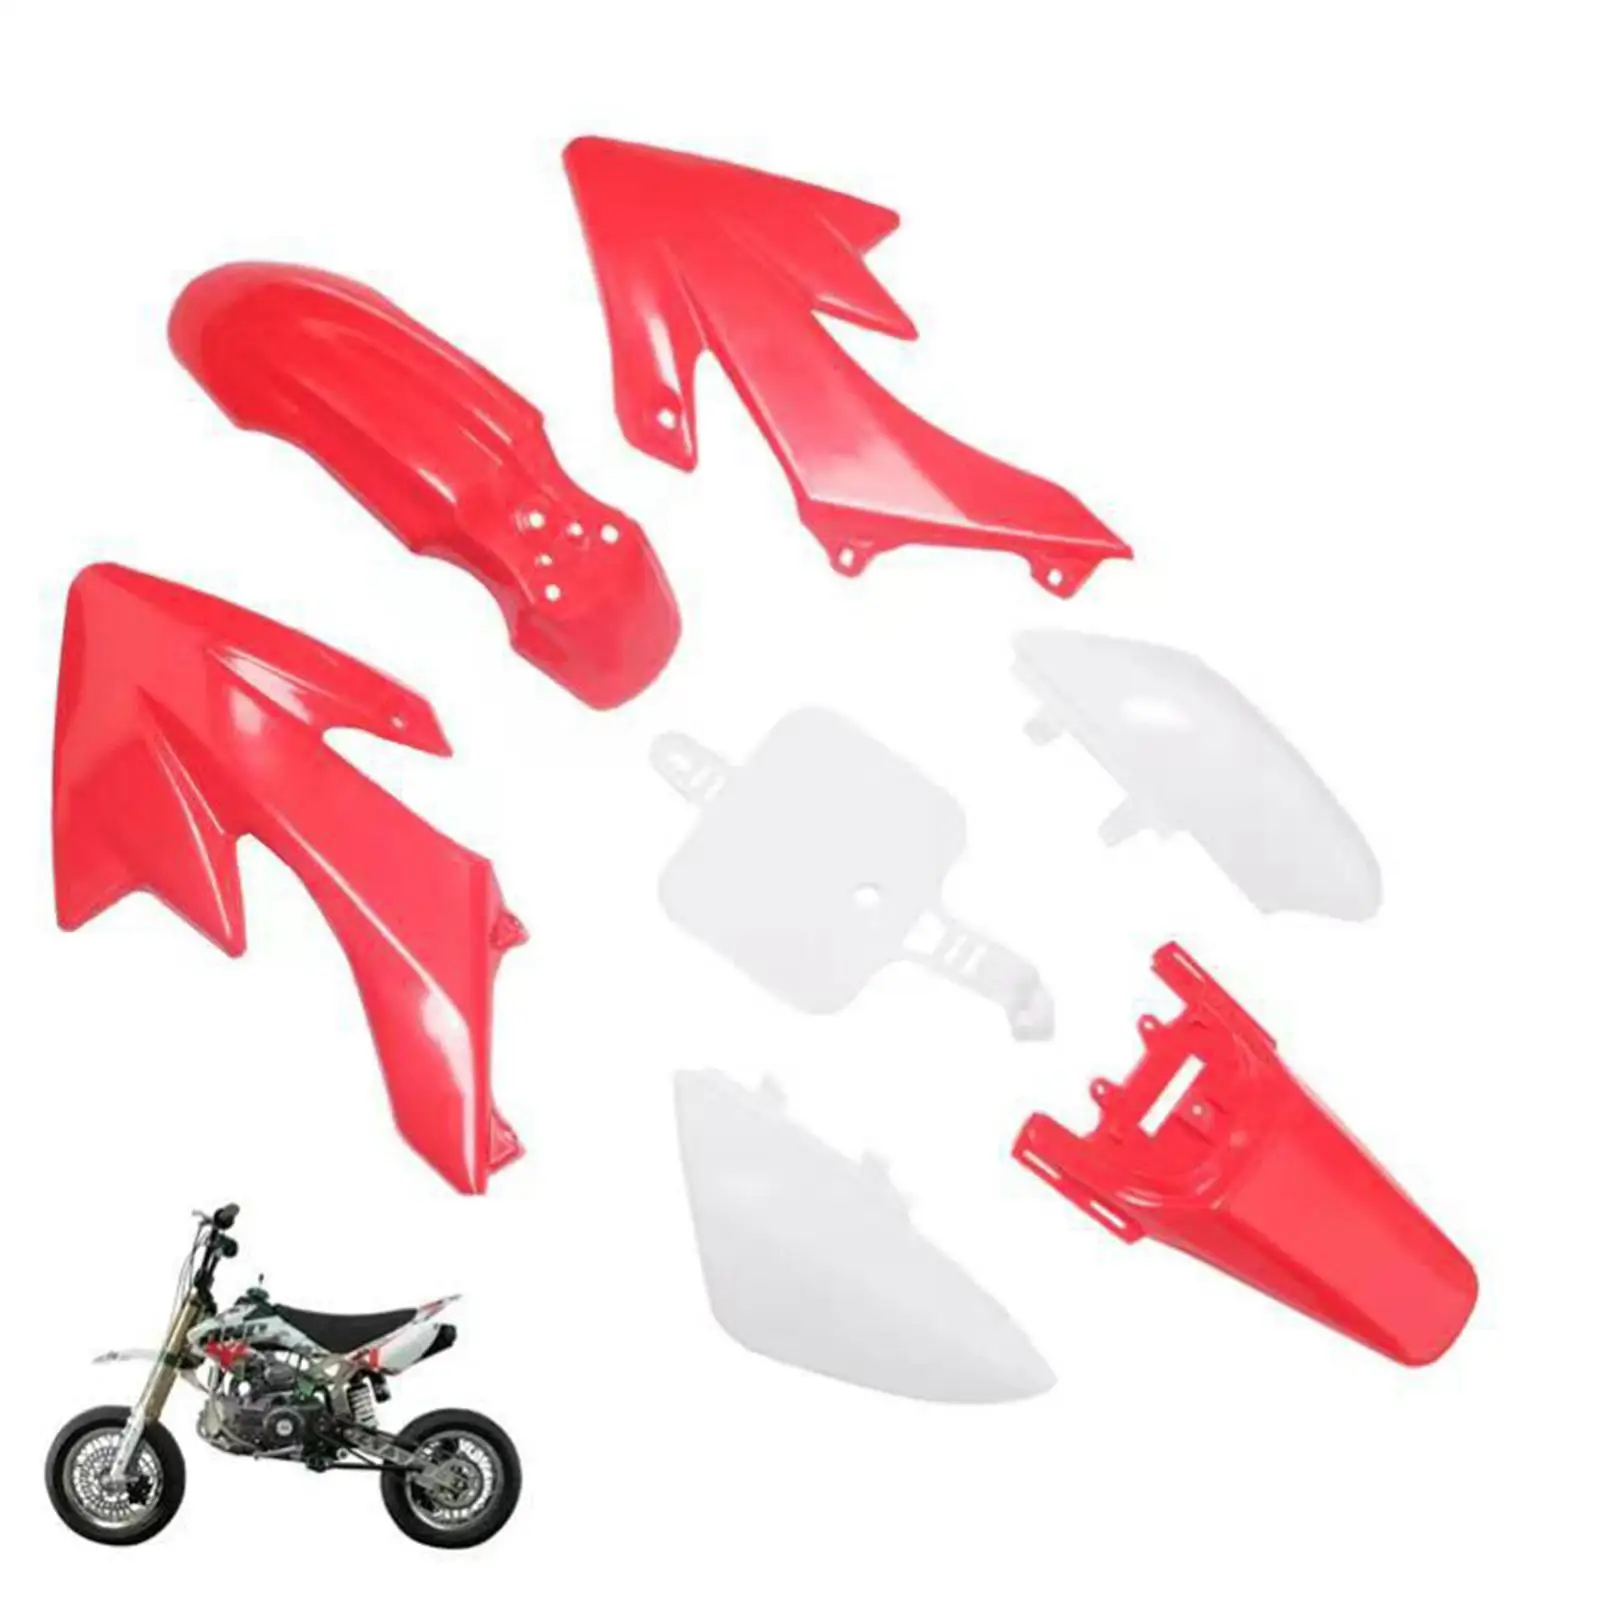 Fairing Fender Set Durable Replaces Motorcycle Accessories Repair Parts Red White for Honda Crf50 XR50 107 110 125 Sdg SSR